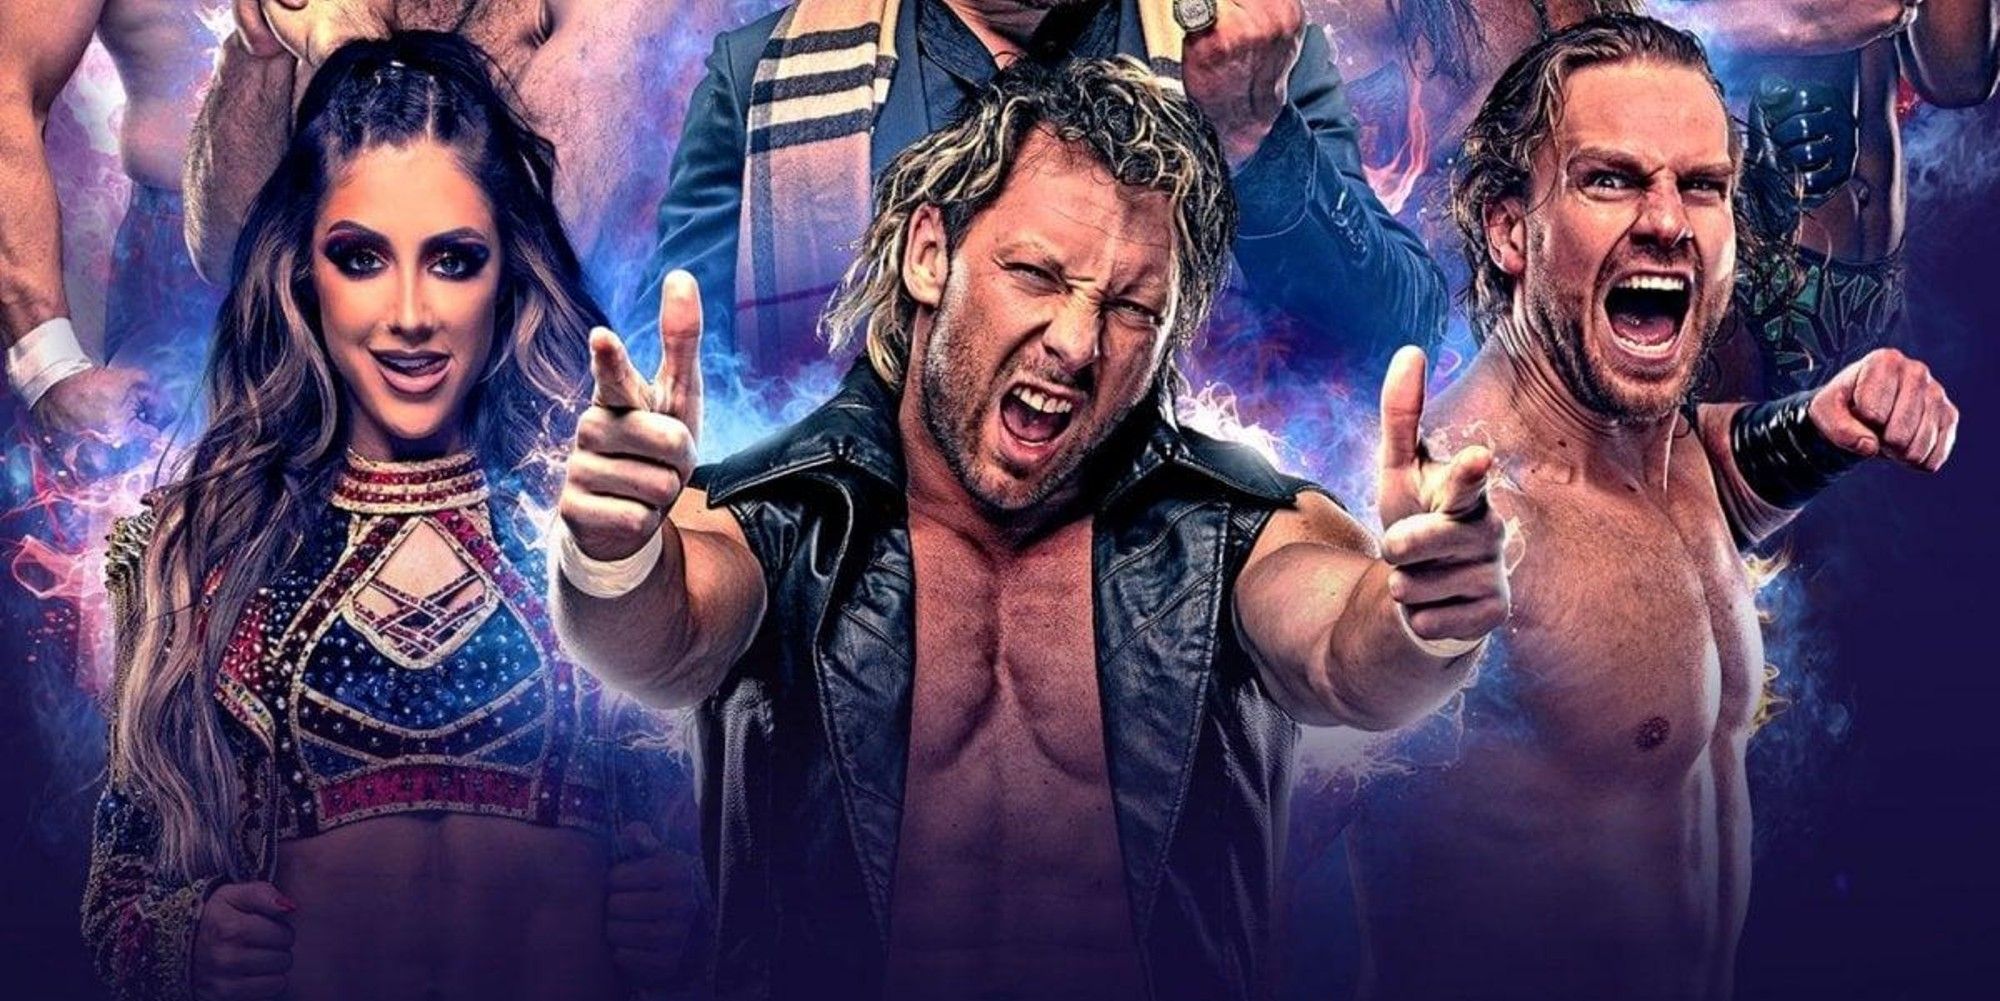 britt baker kenny omega and the hangman page on aew forever fight cover